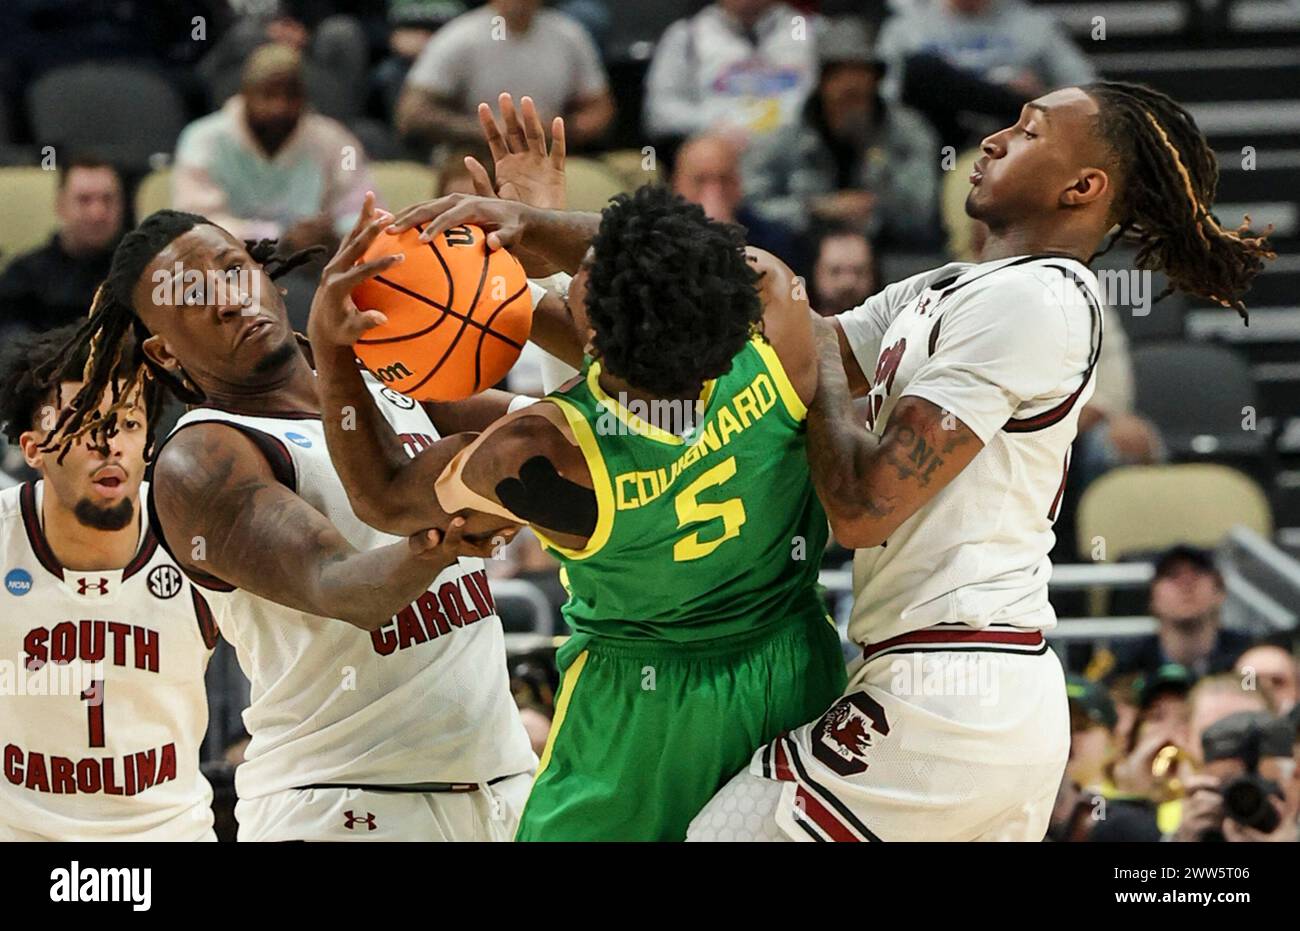 March 21, 2024: South Carolina Gamecocks forward B.J. Mack (left) and guard Zachary Davis (12) battle for a loose ball with Oregon Ducks guard Jermaine Couisnard (5) during the second half of play in the basketball game between Oregon Ducks (11) and South Carolina Gamecocks (6) in the first round of the NCAA Tournament game at the PPG Paints Arena in Pittsburgh, PA. Stock Photo